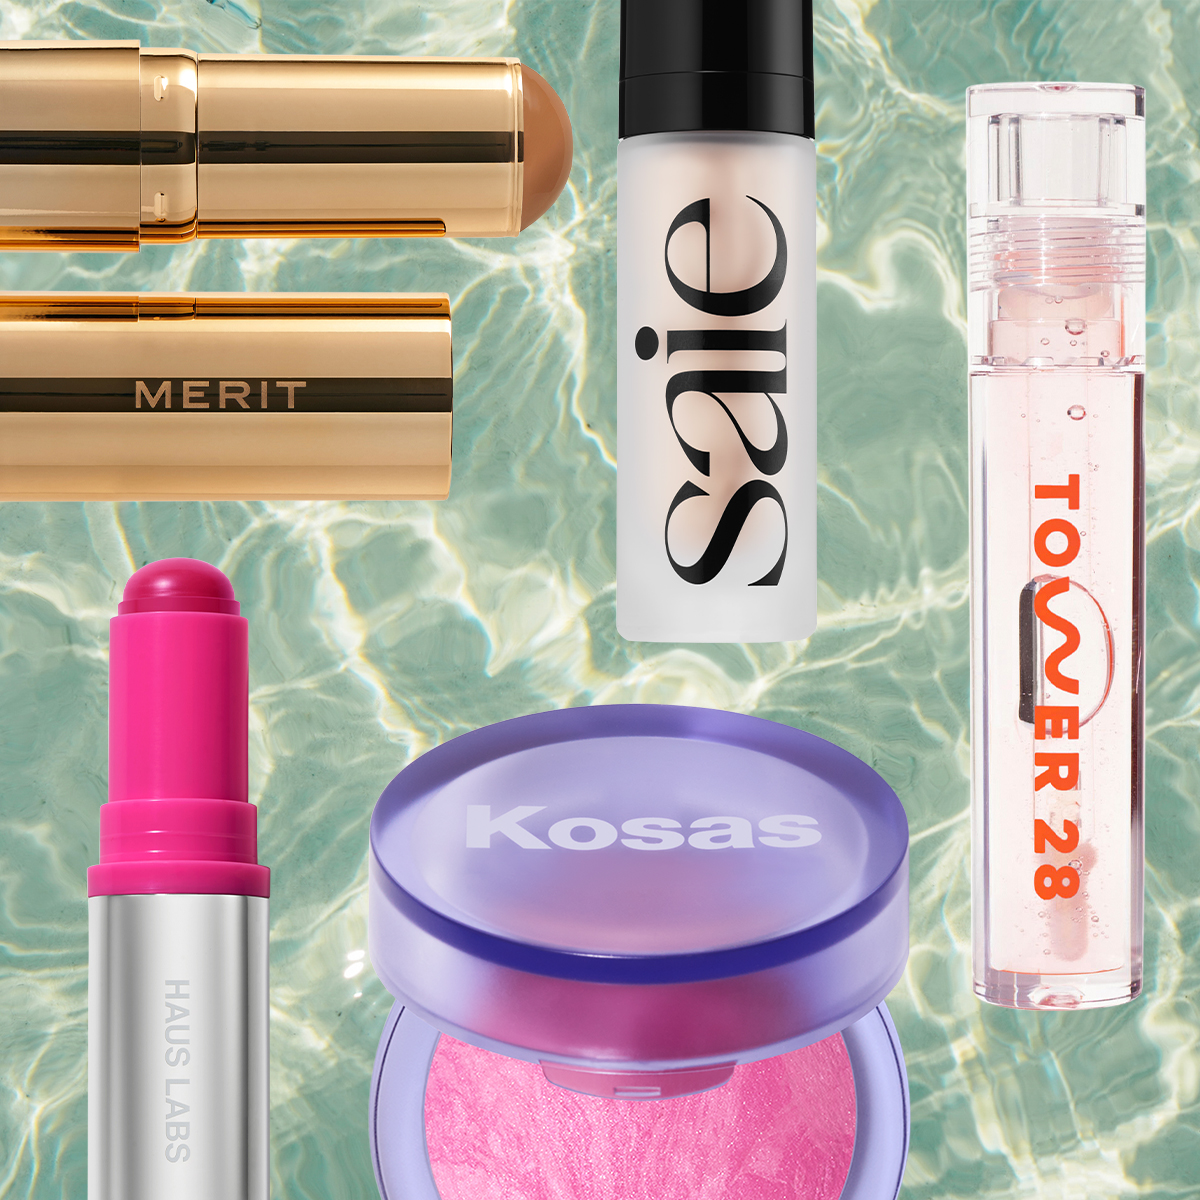 Clean Makeup Is Here to Stay—These 12 Best Sellers Prove My Point